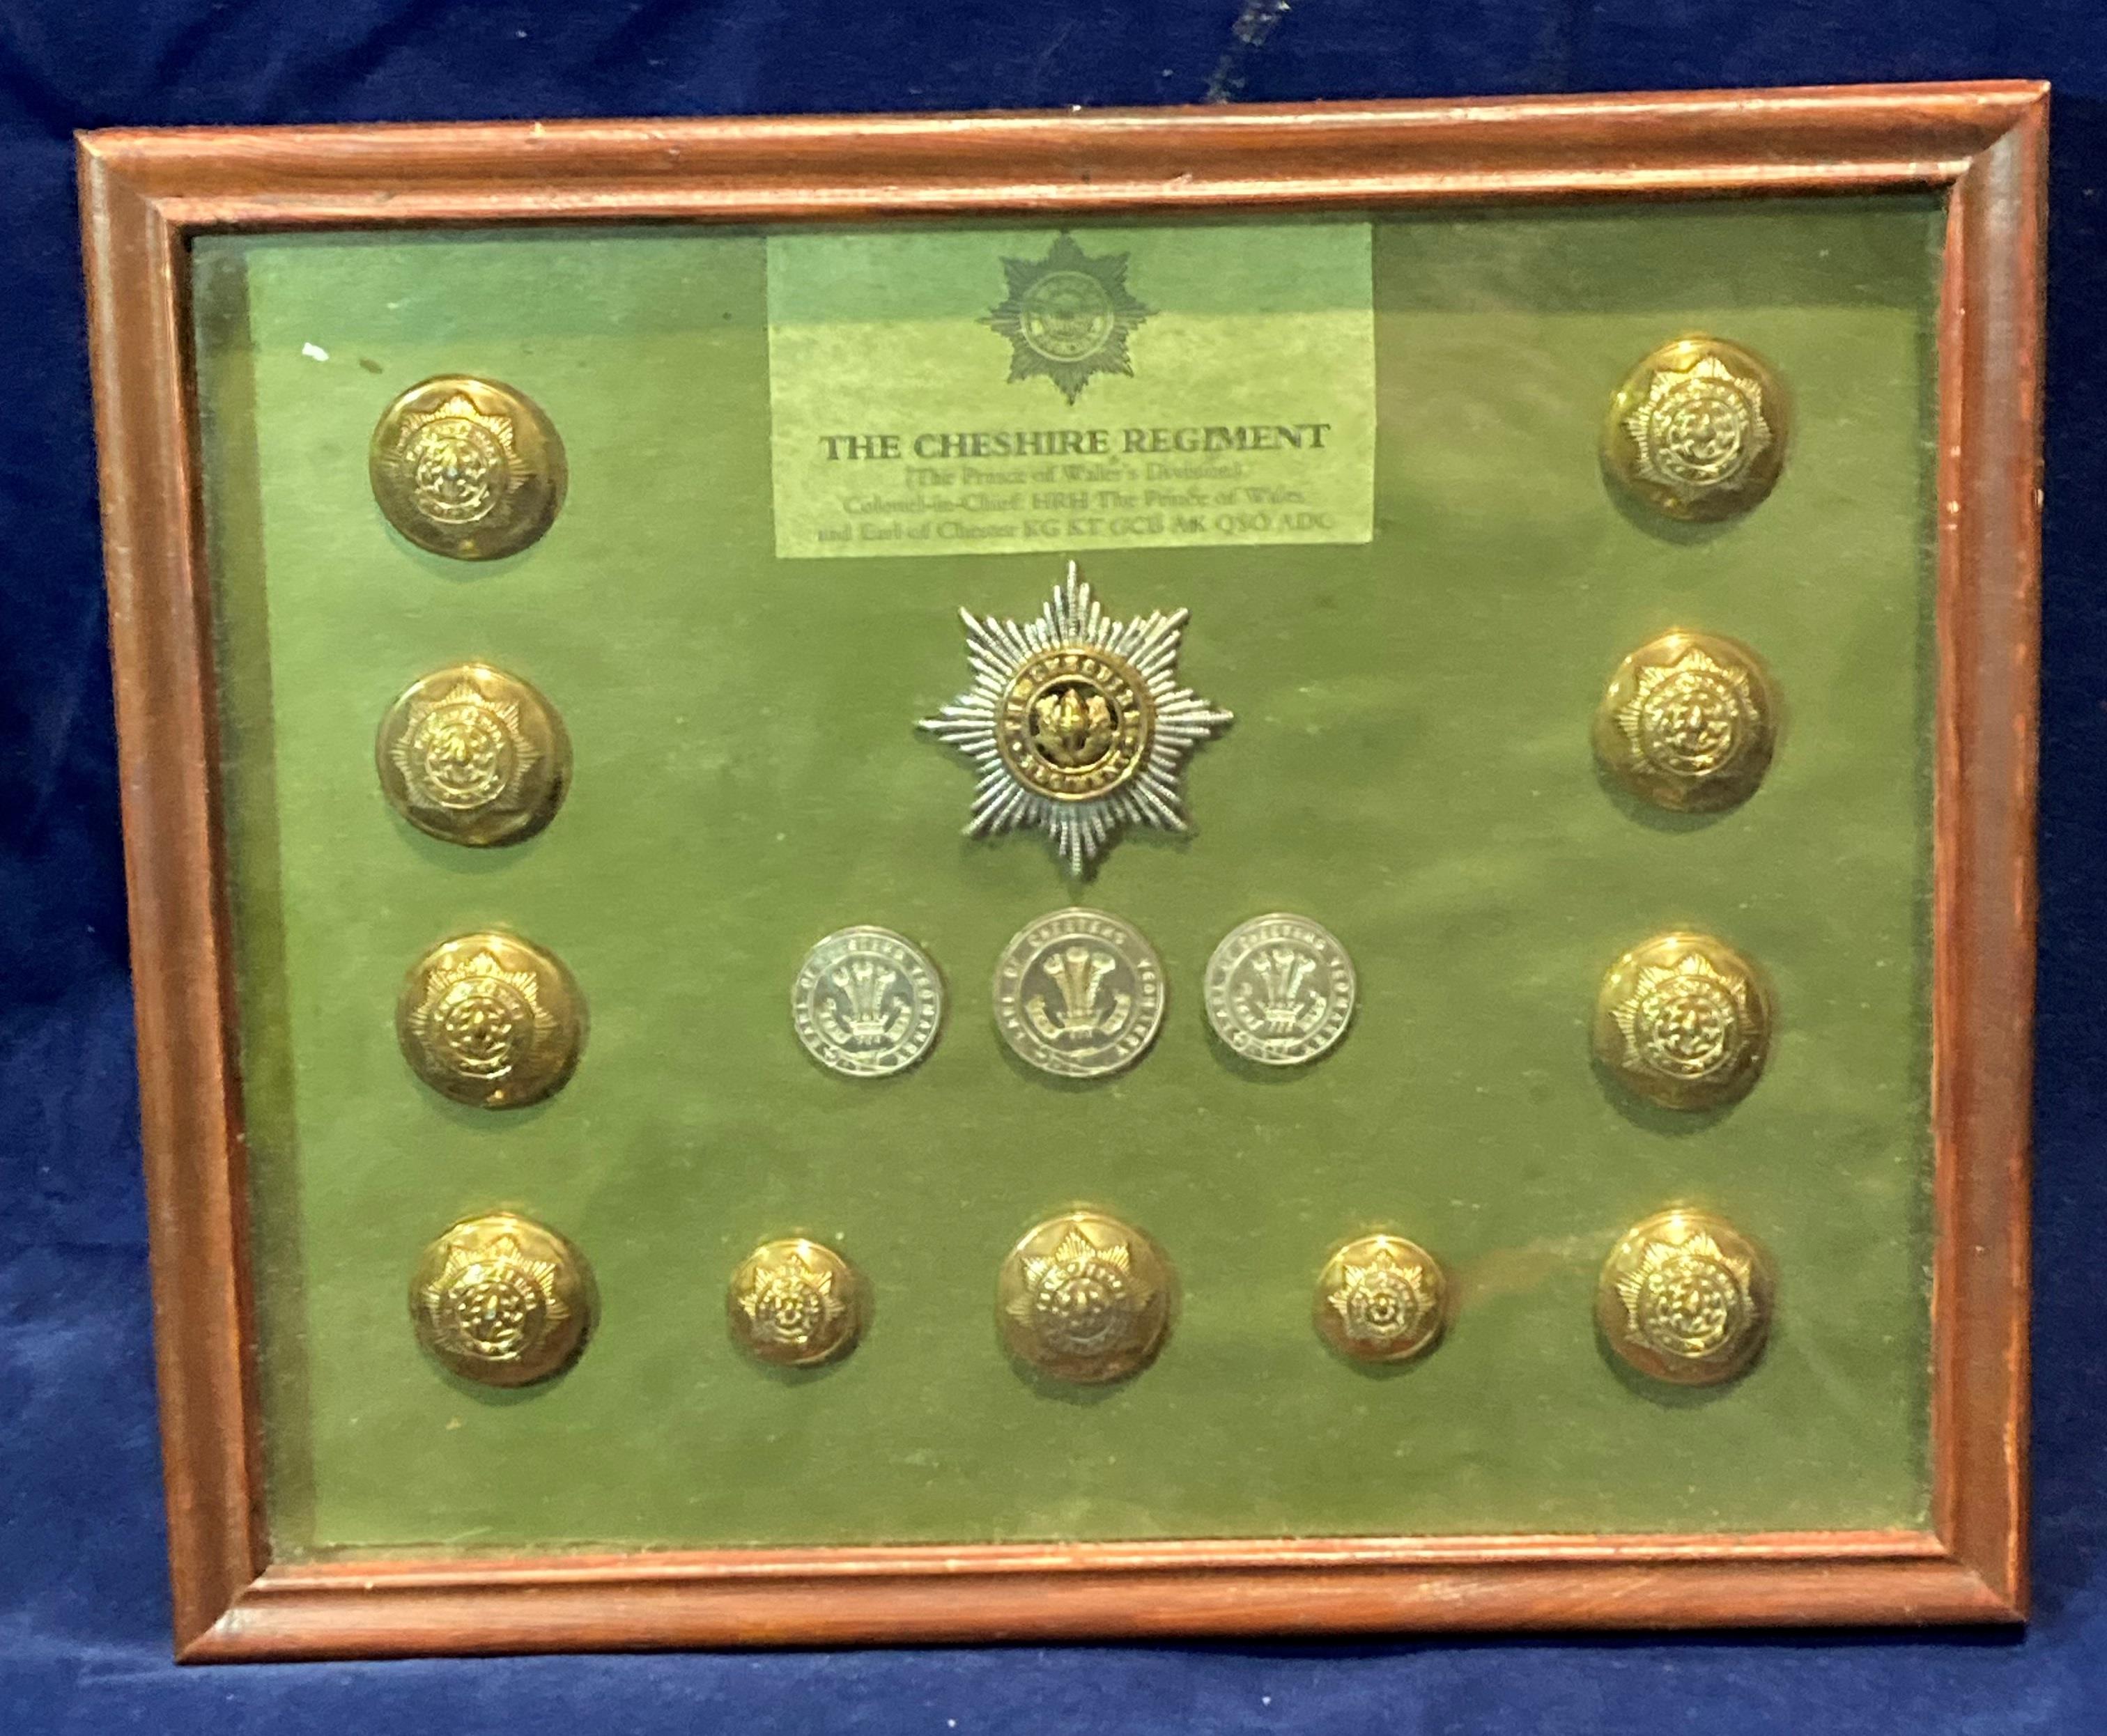 A framed display of badges and buttons for the Cheshire Regiment with a list of battle honours to